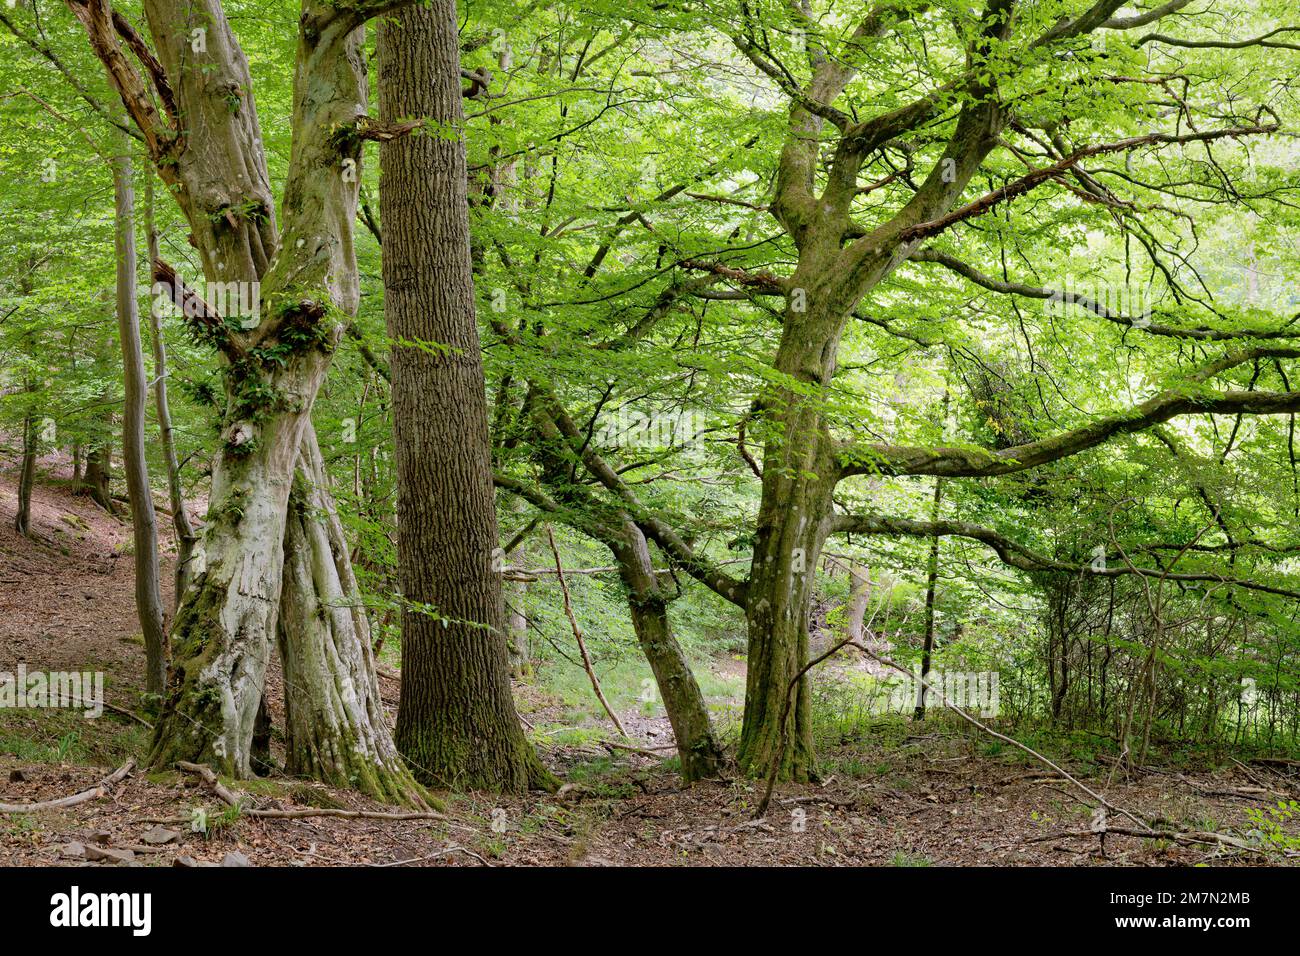 Europe, Germany, Rhineland-Palatinate, Hümmel, forest, mixed forest, trees, beeches, Fagus, hornbeams, Carpinus betulus, oak, quercus, pair of trees, togetherness, connected, connectedness, old trees, tree shapes, bizarre, mystical, nobody, no persons Stock Photo